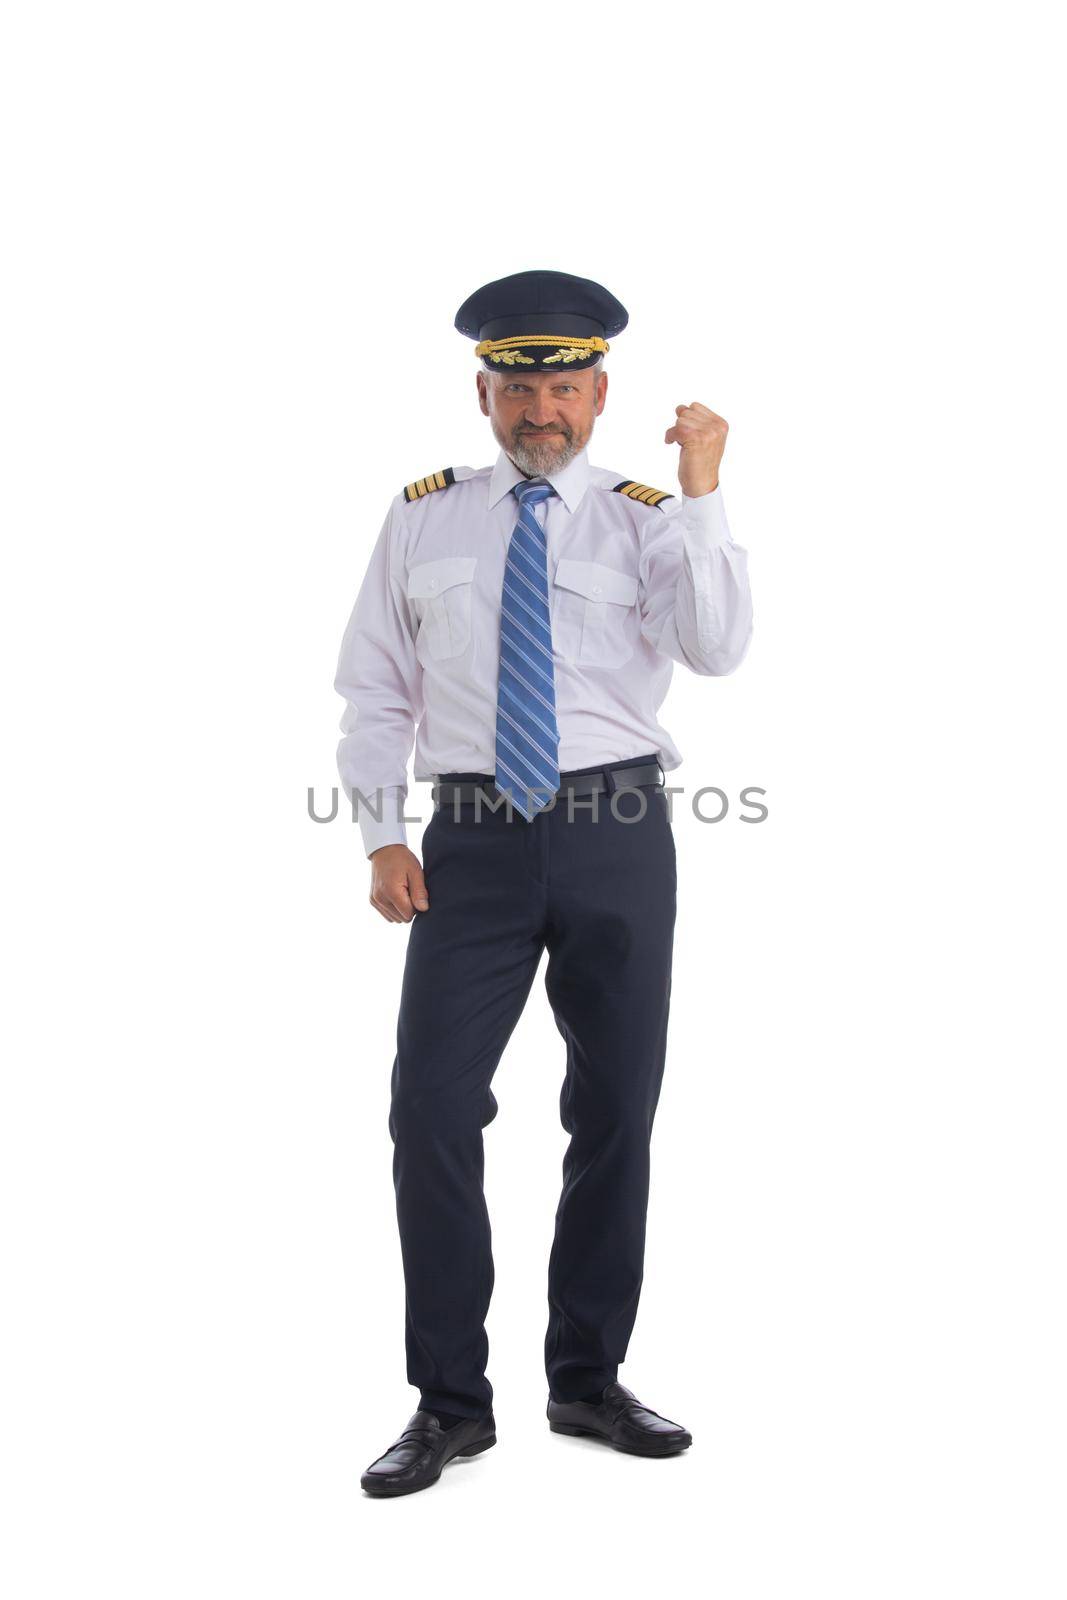 Airline pilot holding fist yes gesture by ALotOfPeople